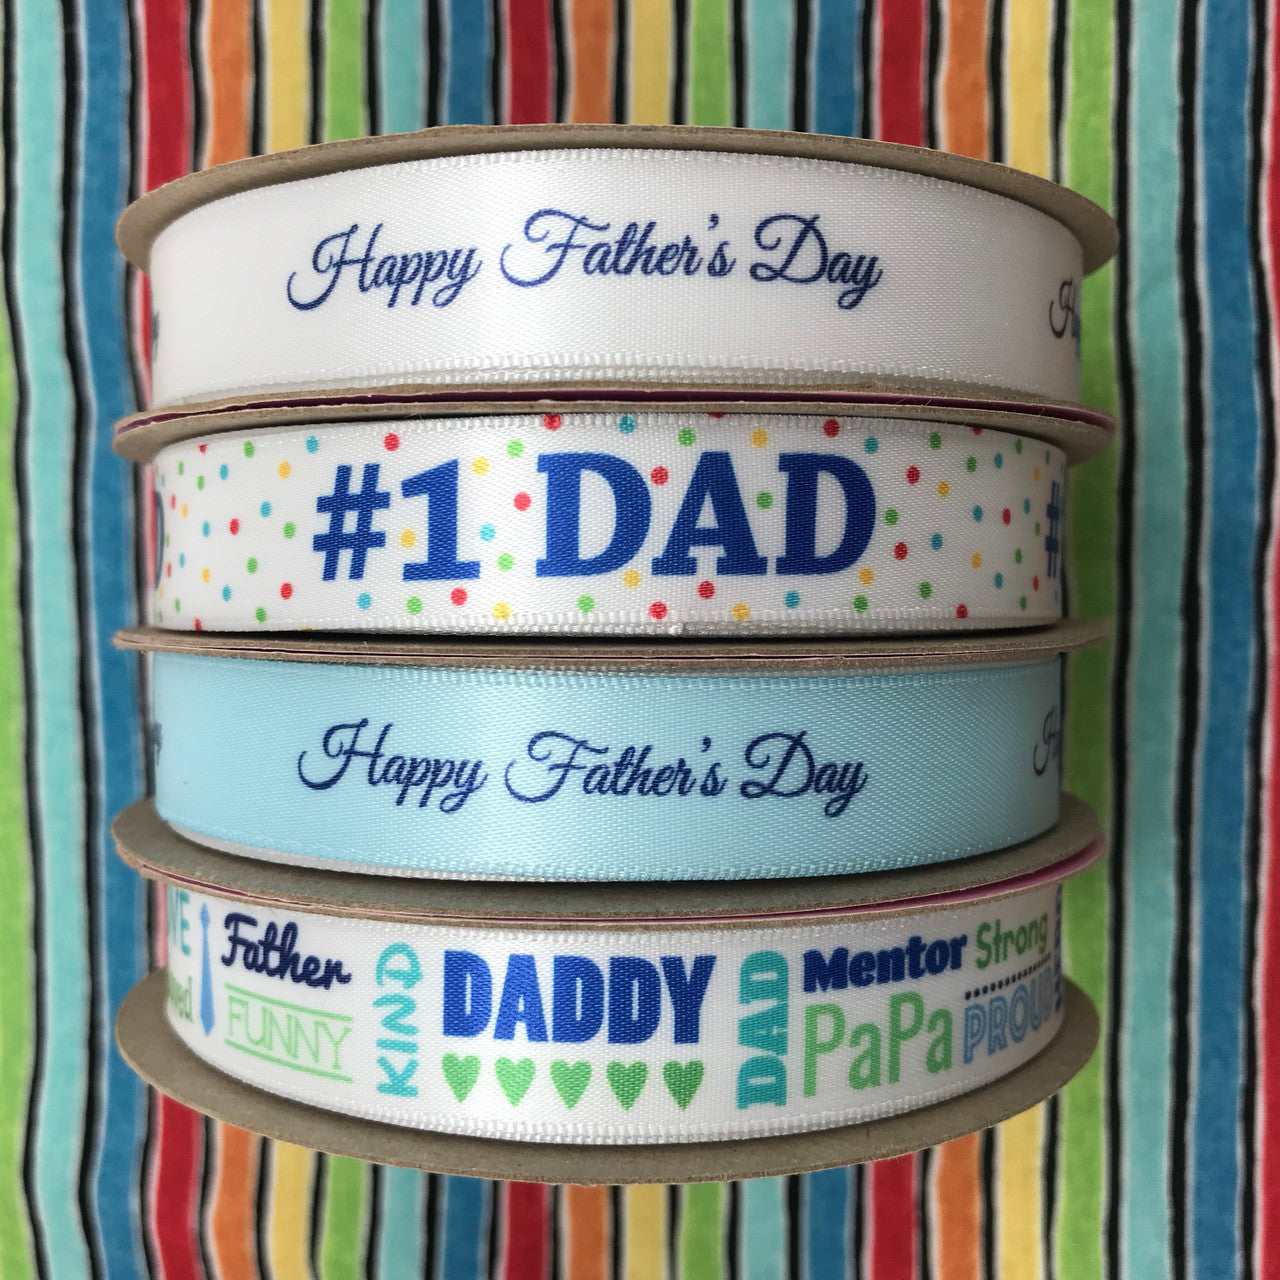 Mix and Match our Father's Day ribbon collection to make Dad's gifts really pop!!